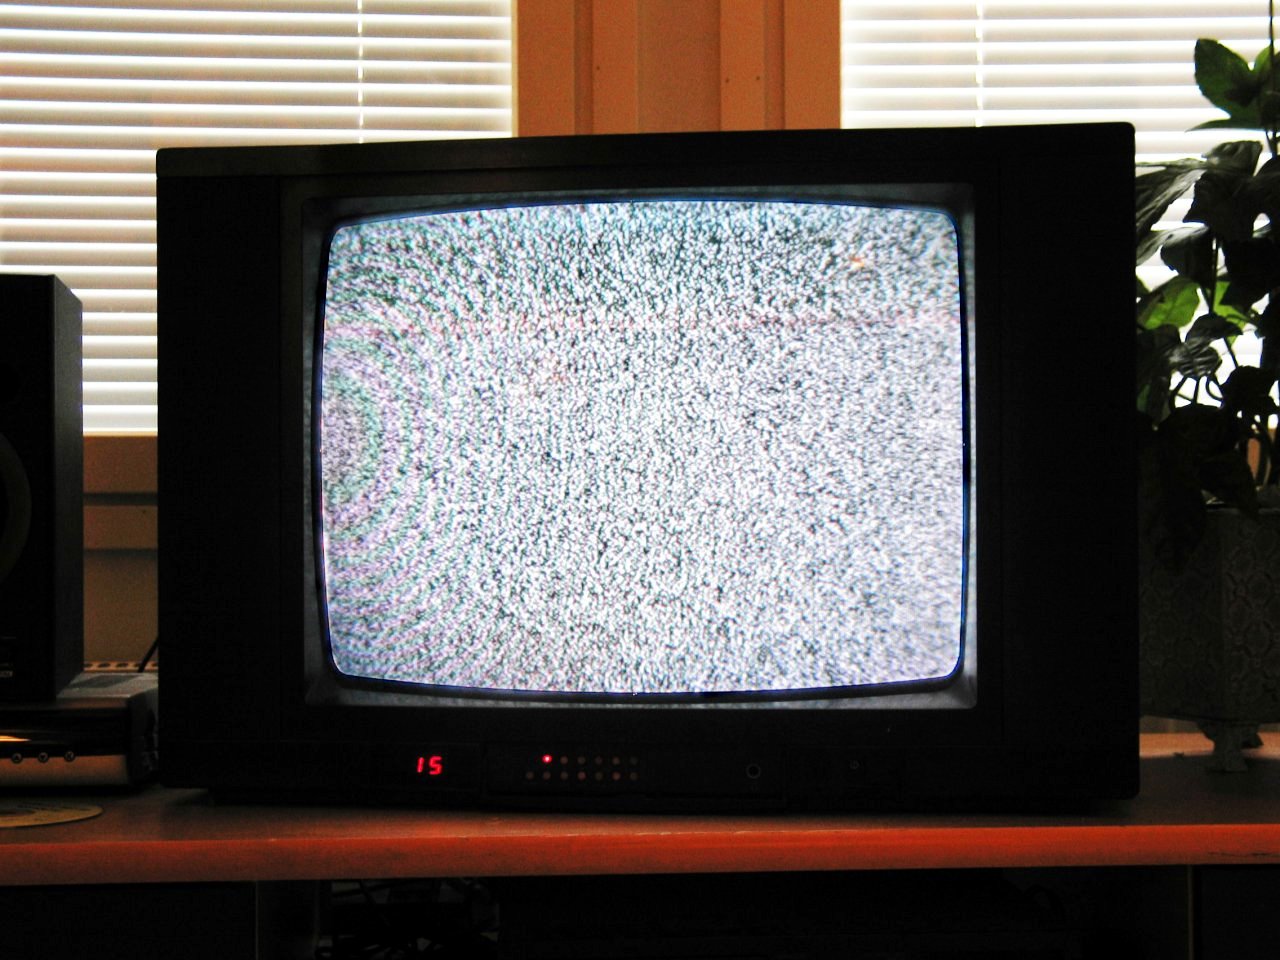 What Causes Television Static?